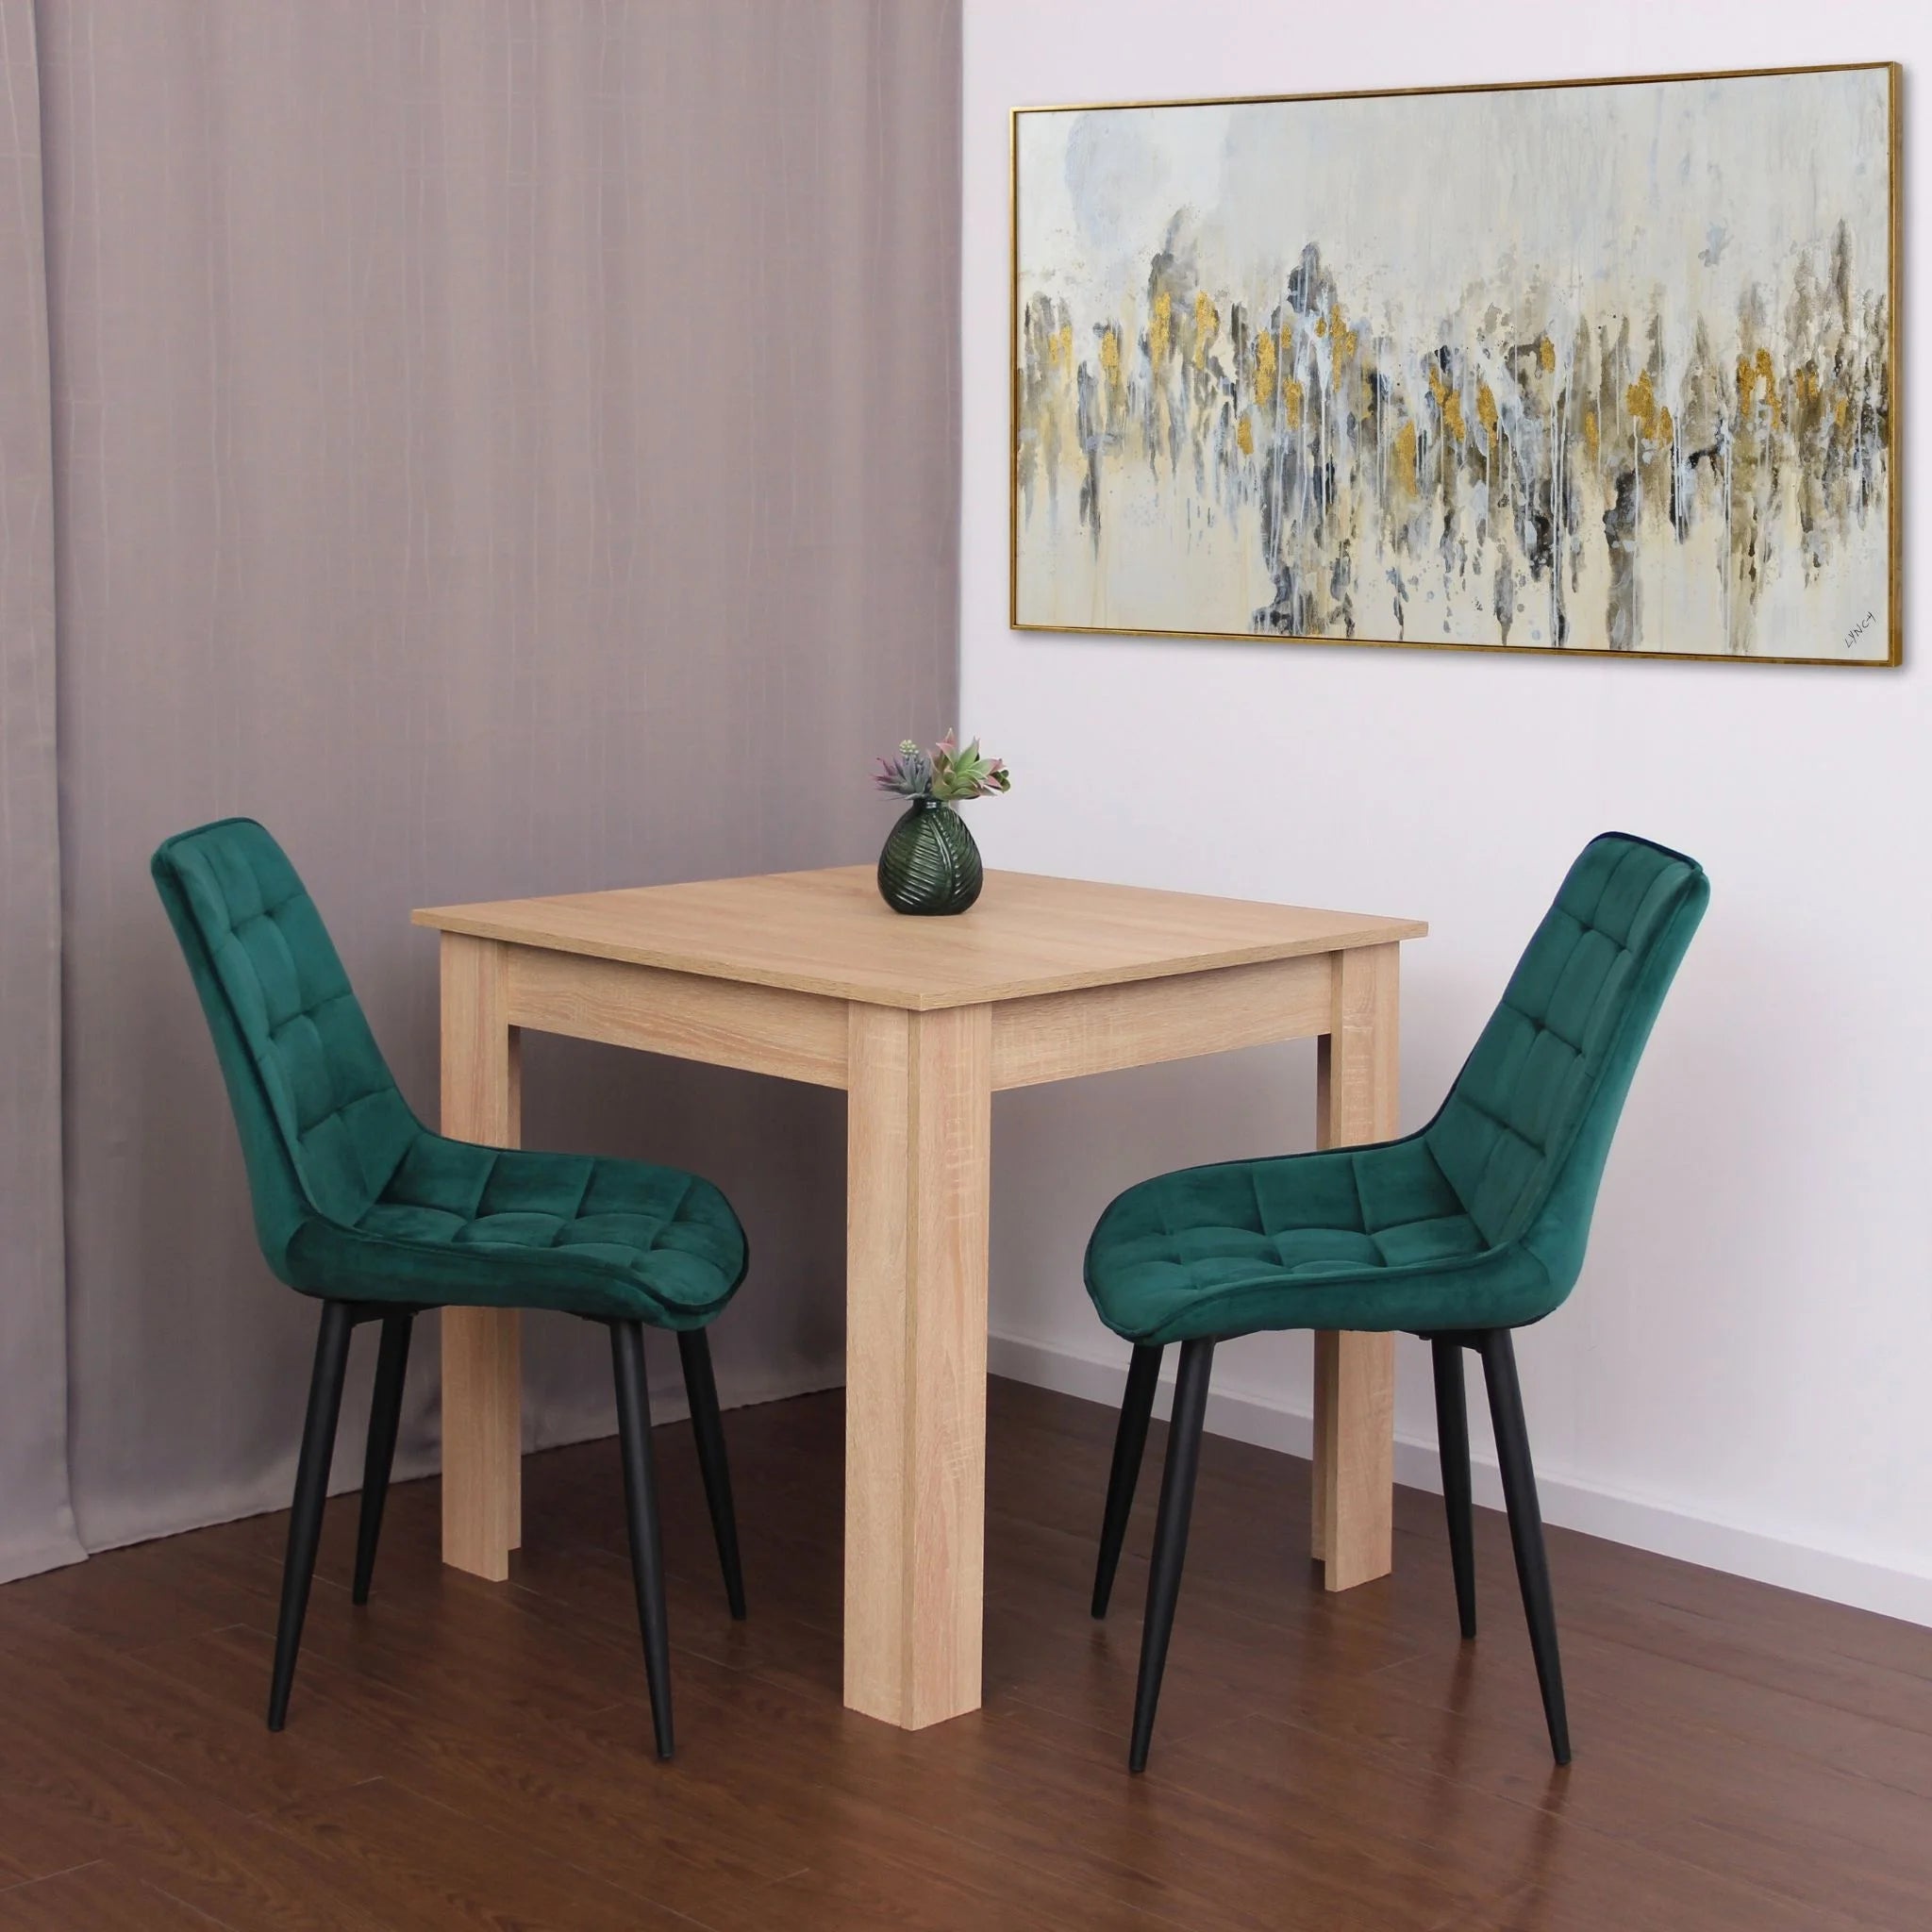 minimalist dining setup featuring green velvet chairs on brown wood effect flooring